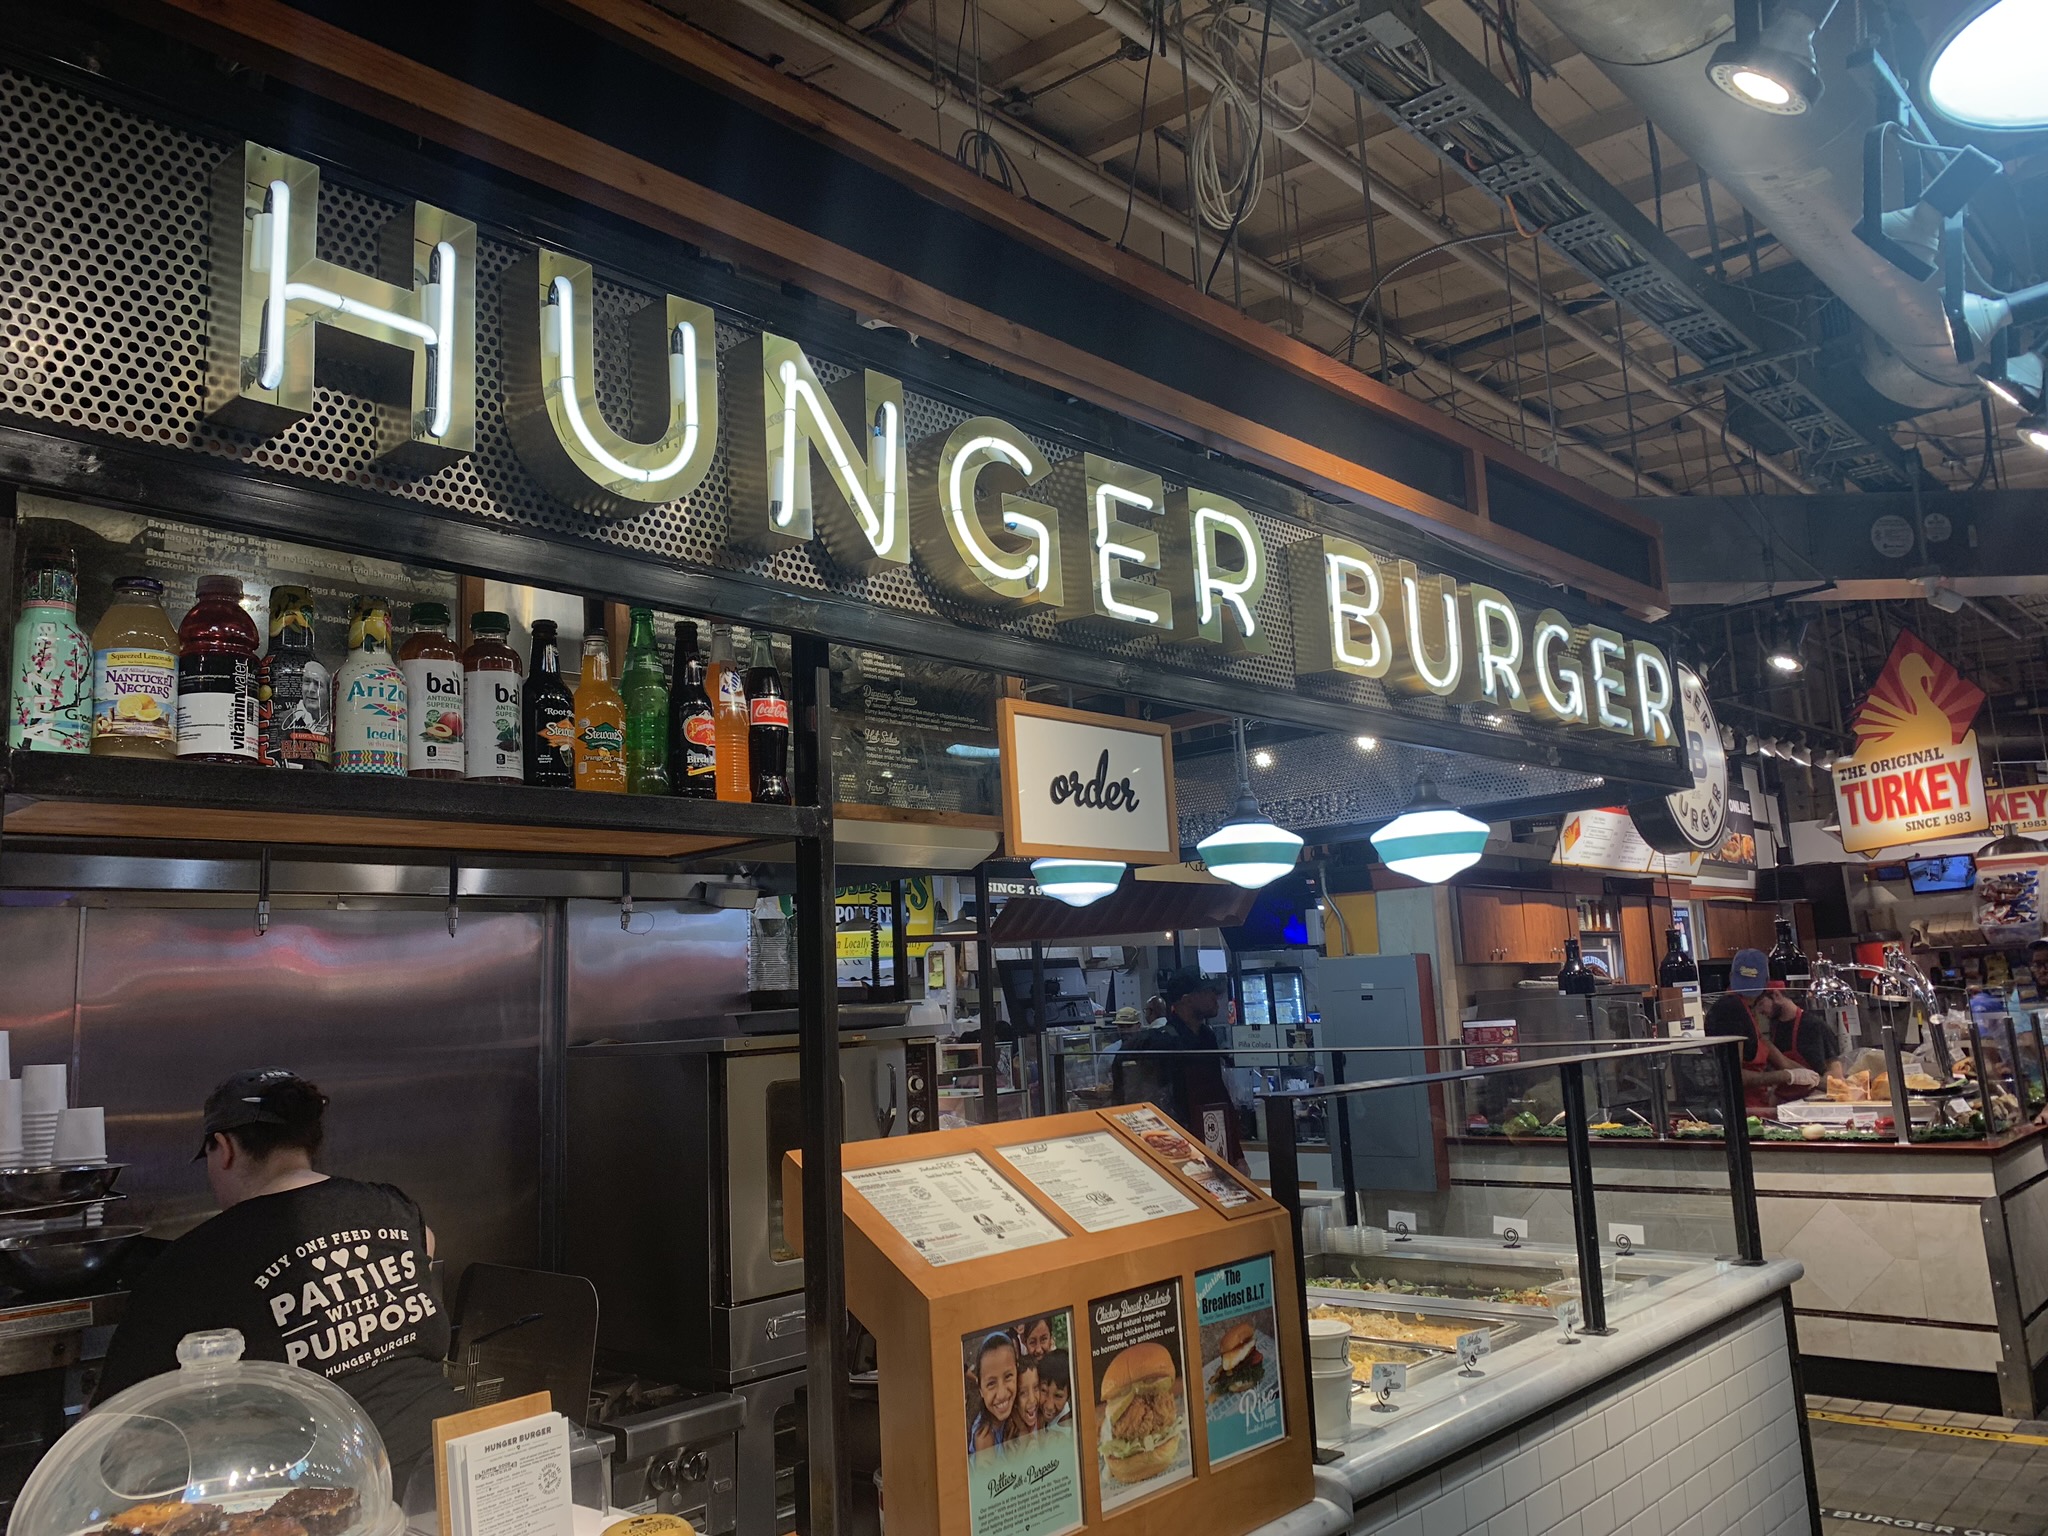 Hunger Burger, serving ‘patties with a purpose